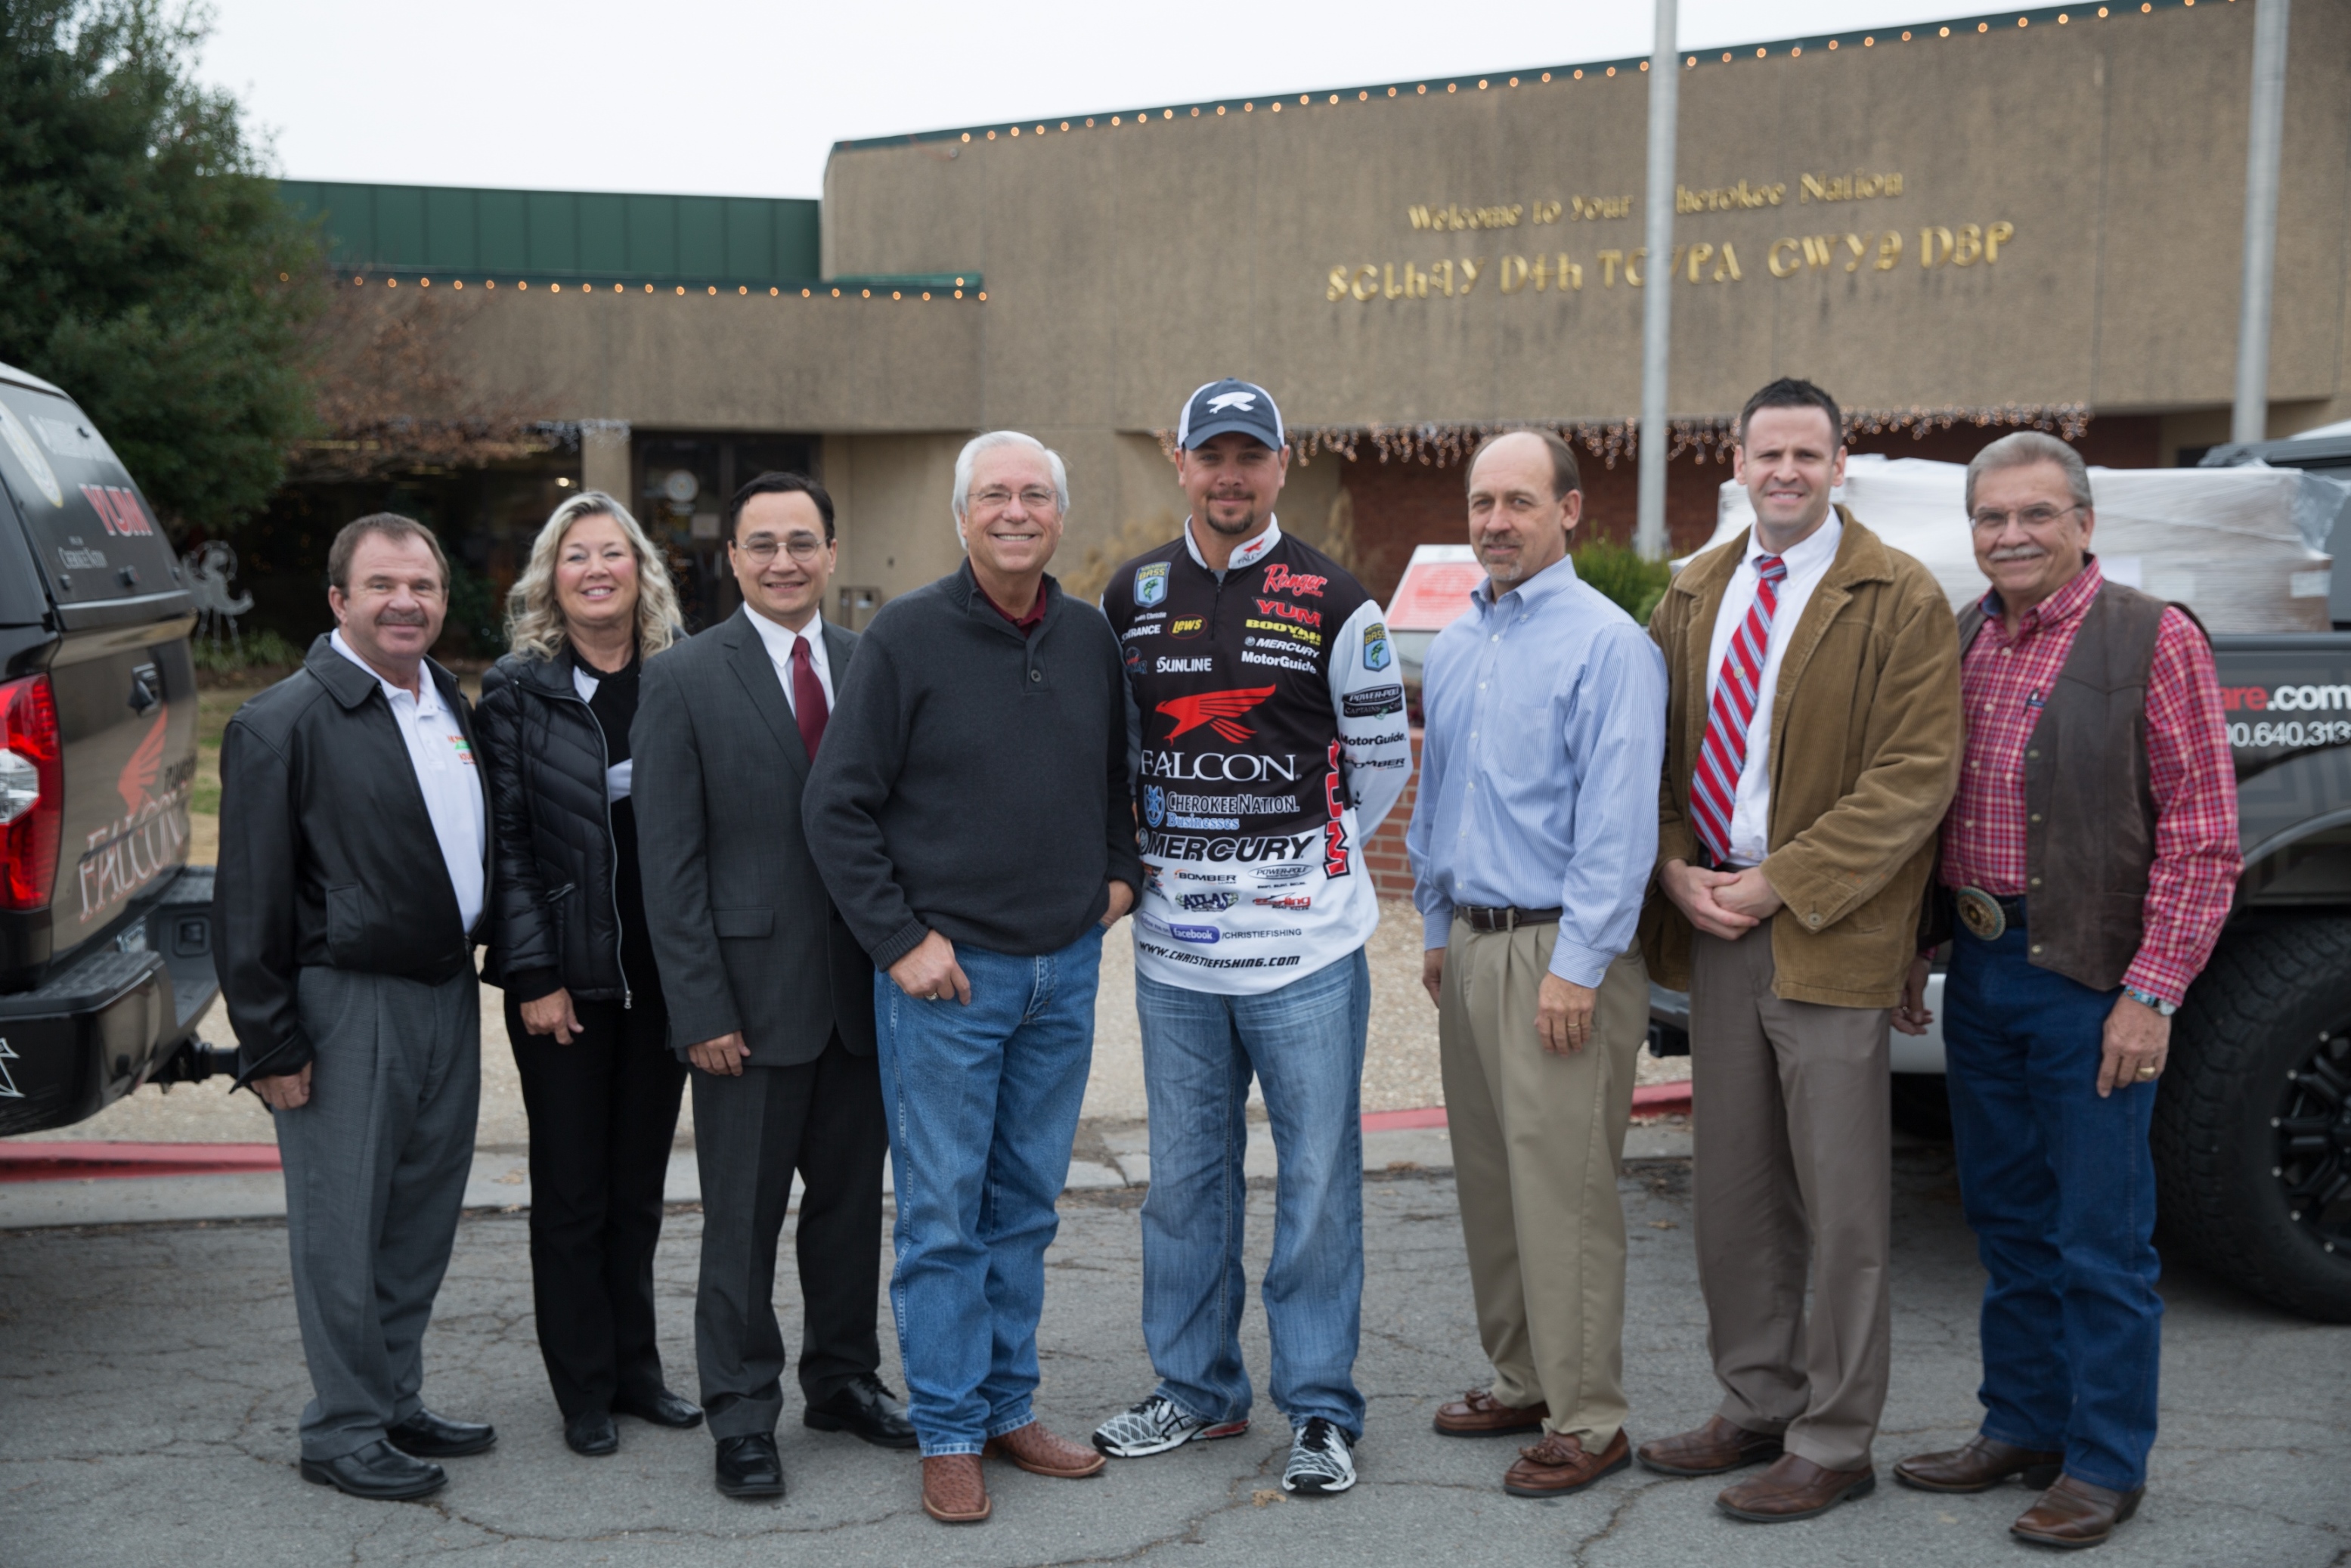 Cherokee Nation officials receive donation from Hunger Buster Beef Cuts, thanks to a partnership with professional angler and Cherokee Nation citizen Jason Christie. (L to R) Richard Cranford, owner of QuarterShare LLC; Janice Randall, executive director of The Cherokee Nation Foundation; Cherokee Nation Secretary of State Chuck Hoskin Jr; Cherokee Nation Principal Chief Bill John Baker; Jason Christie, professional angler; Jim Enneking, fishing buyer for Wal-Mart Stores; Cherokee Nation Tribal Councilor David Walkingstick; and Cherokee Nation Deputy Chief S. Joe Crittenden.